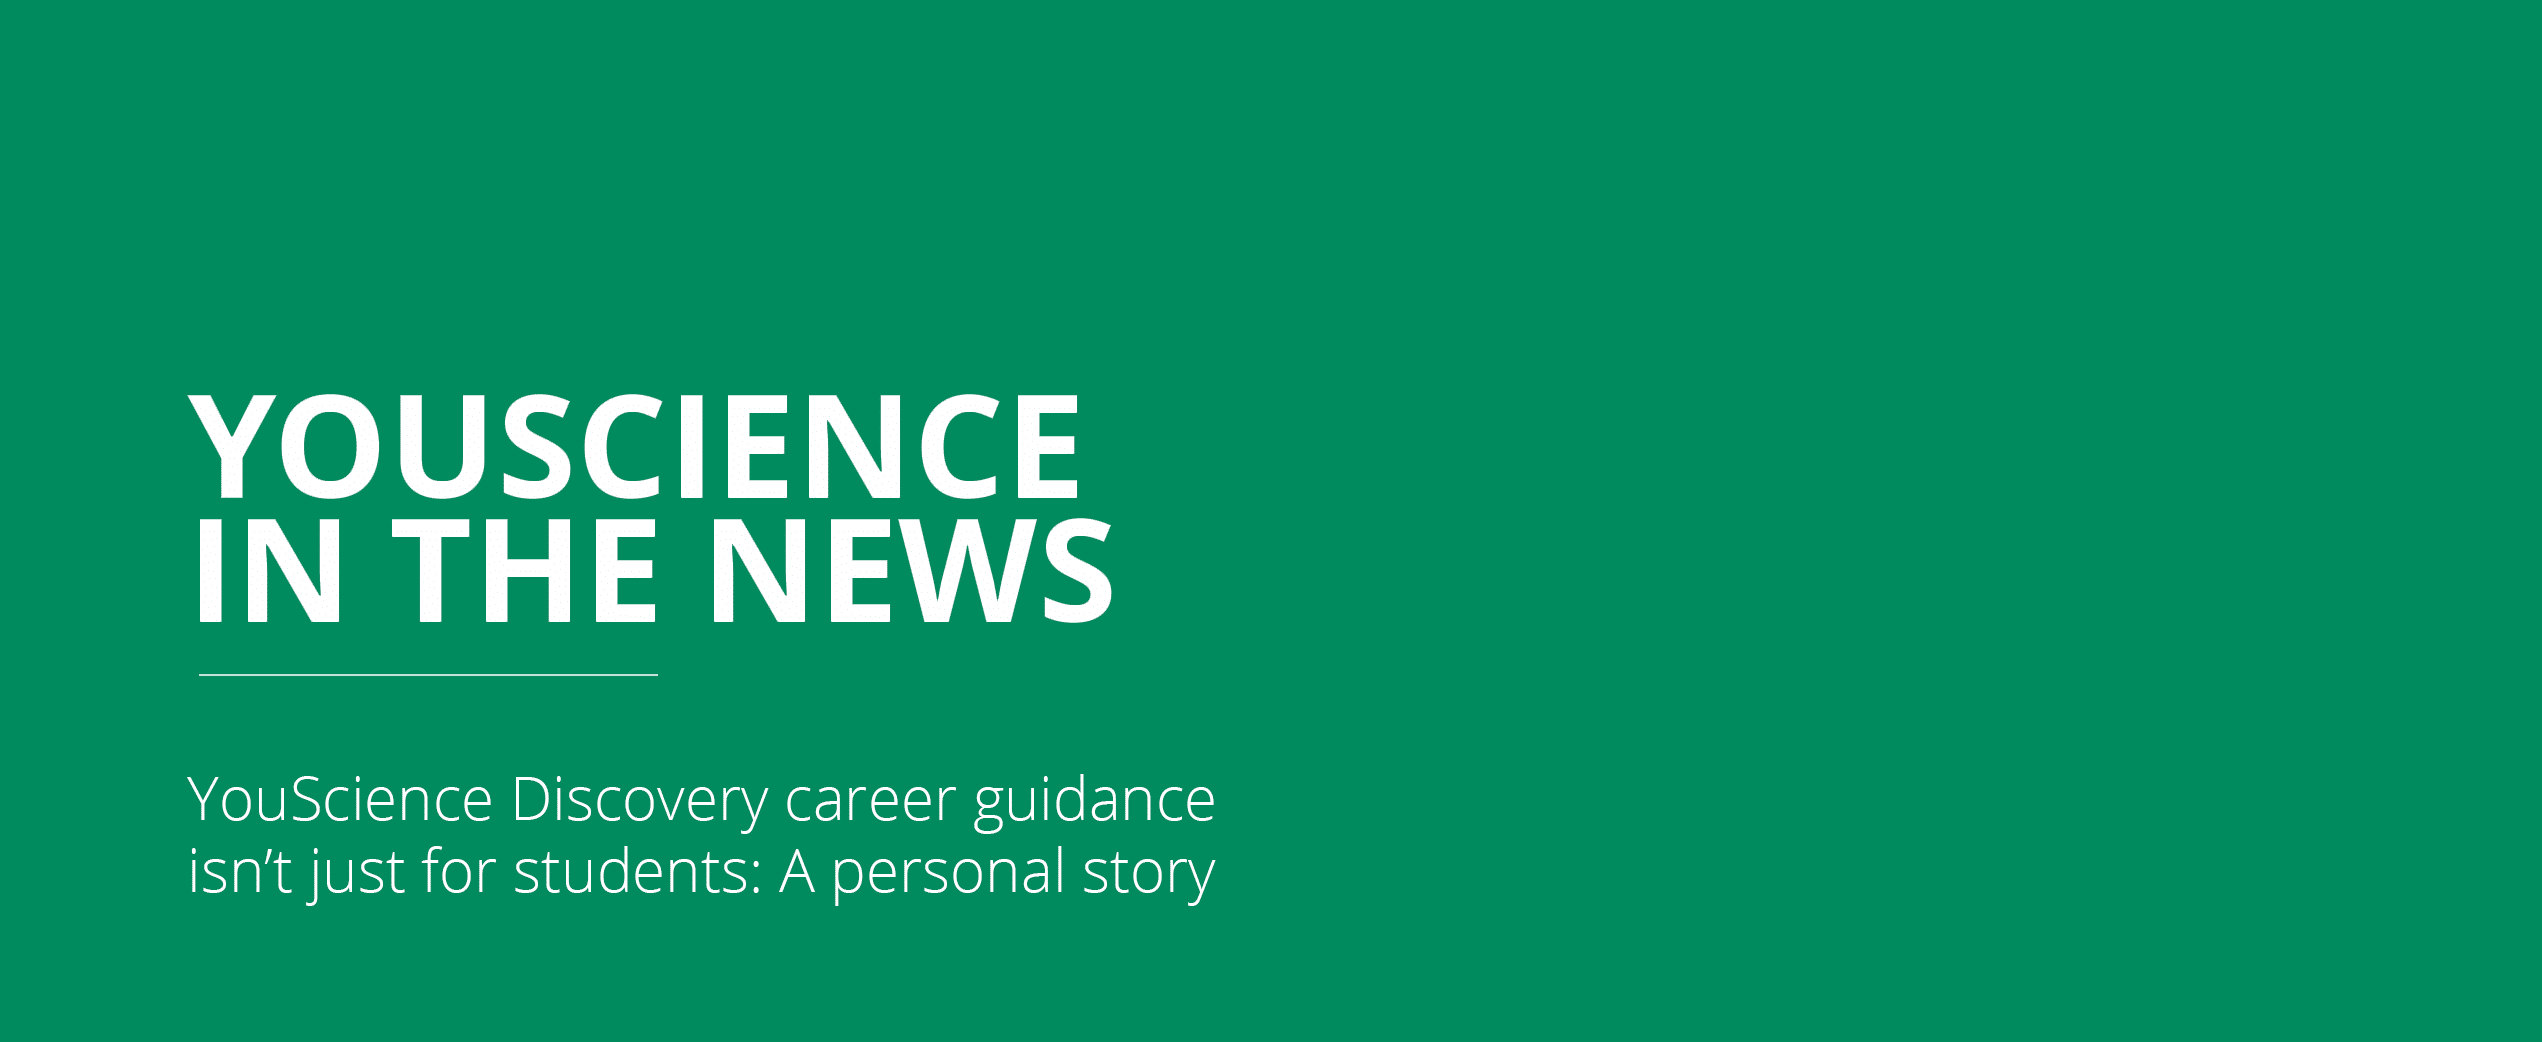 YouScience Discovery career guidance isn’t just for students: A personal story